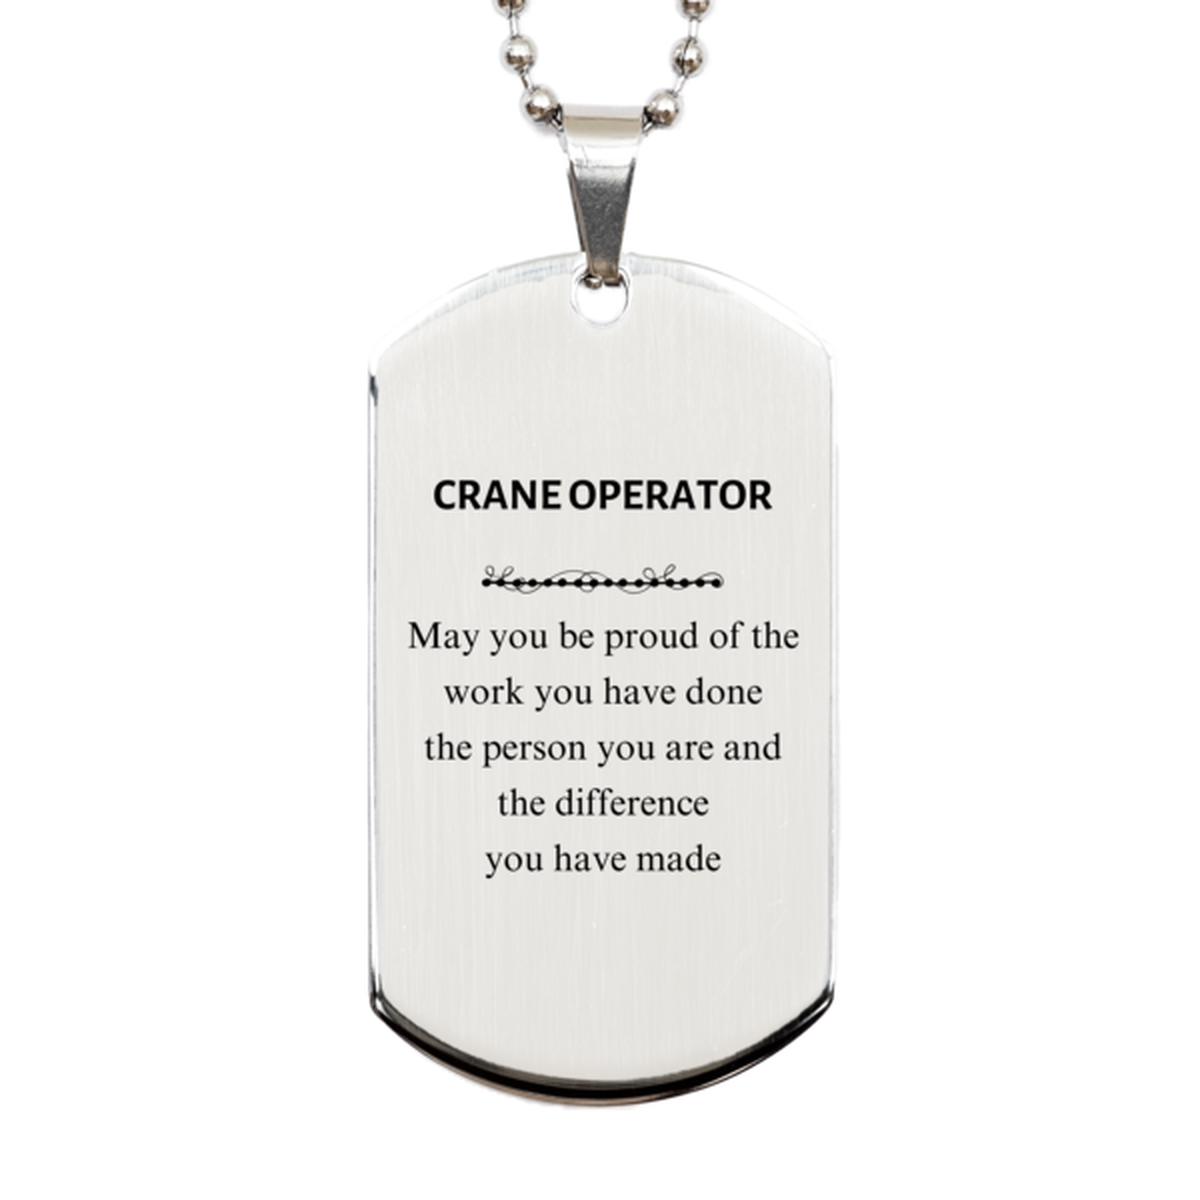 Crane Operator May you be proud of the work you have done, Retirement Crane Operator Silver Dog Tag for Colleague Appreciation Gifts Amazing for Crane Operator